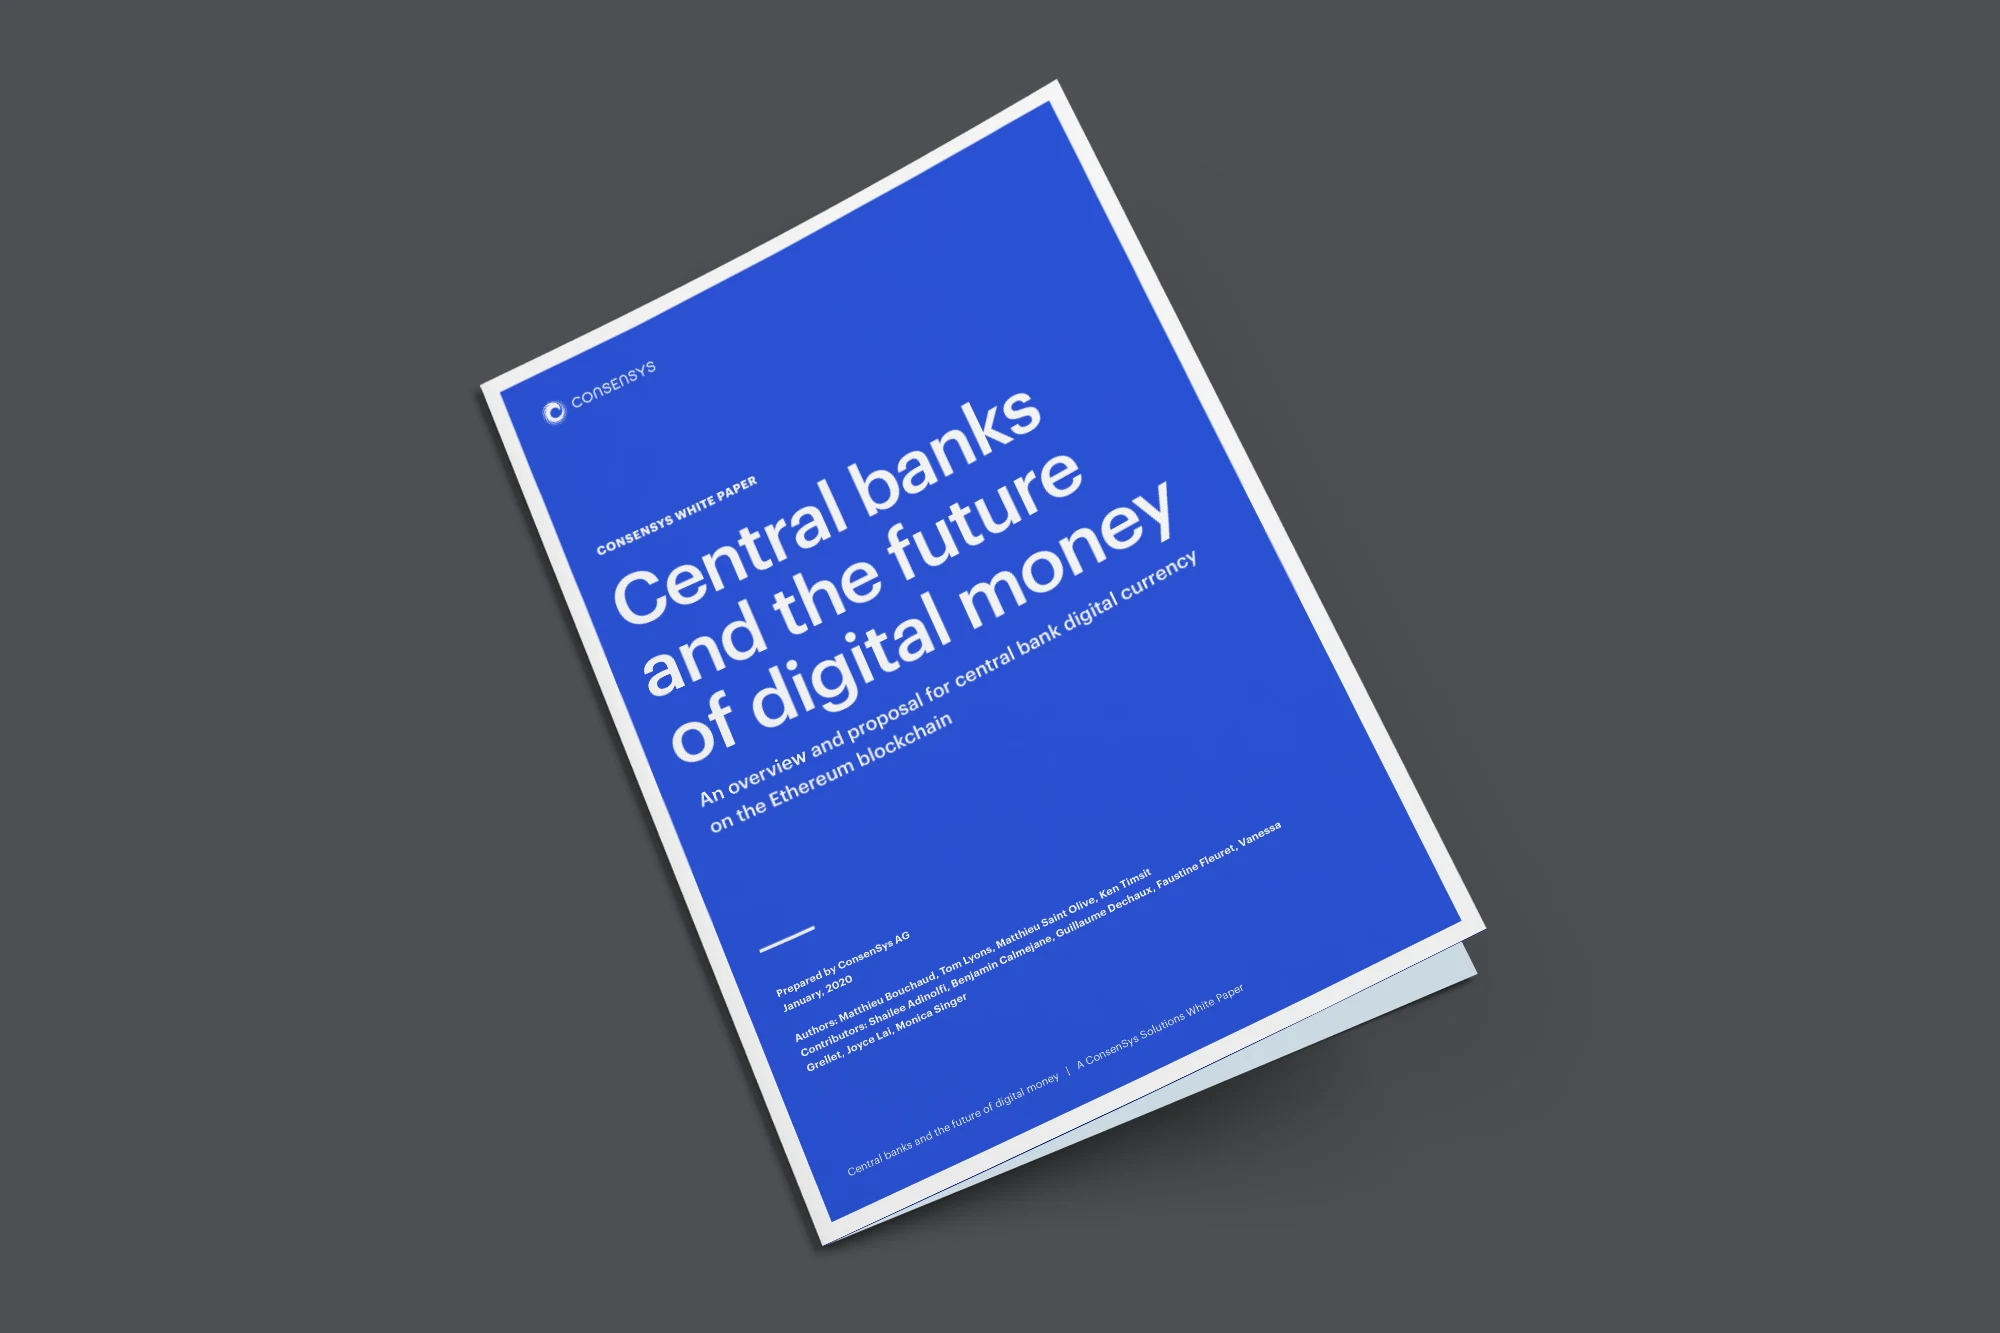 Central banks and the future of digital money